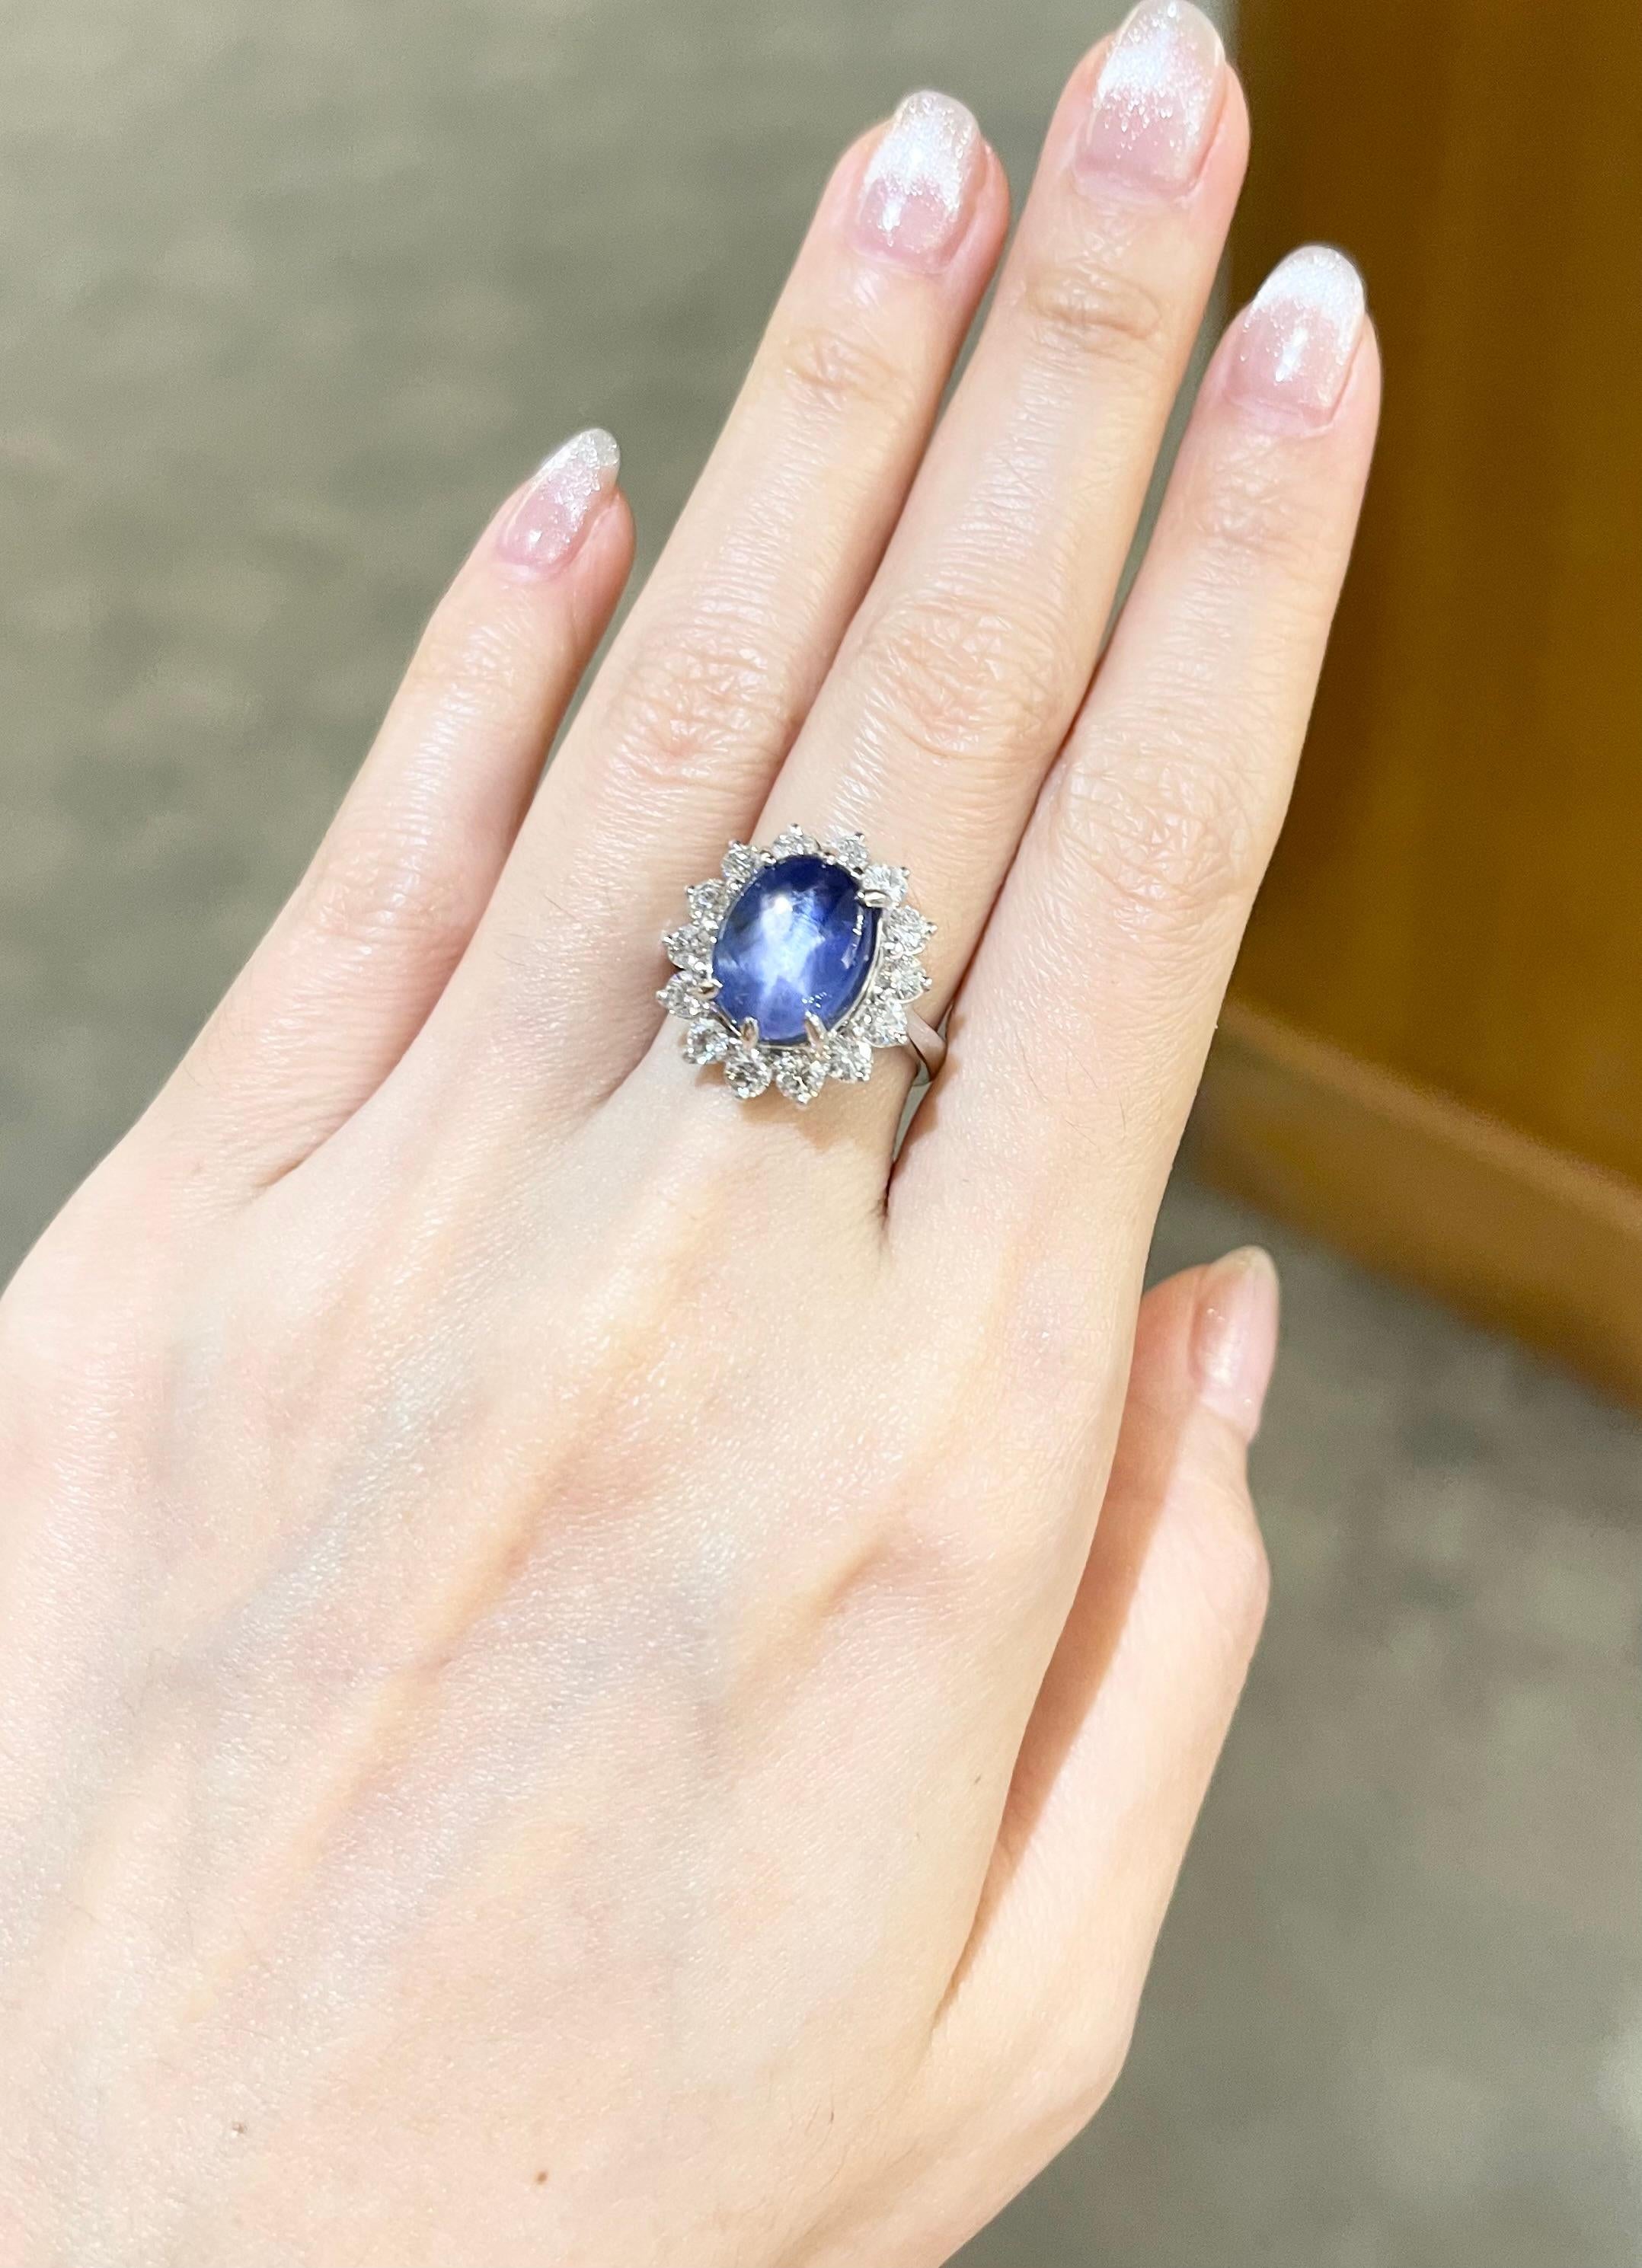 Blue Star Sapphire 4.63 carats with Diamond 1.30 carat Ring set in 18K White Gold Settings

Width:  1.7 cm 
Length: 2.0 cm
Ring Size: 51
Total Weight: 9.12 grams

